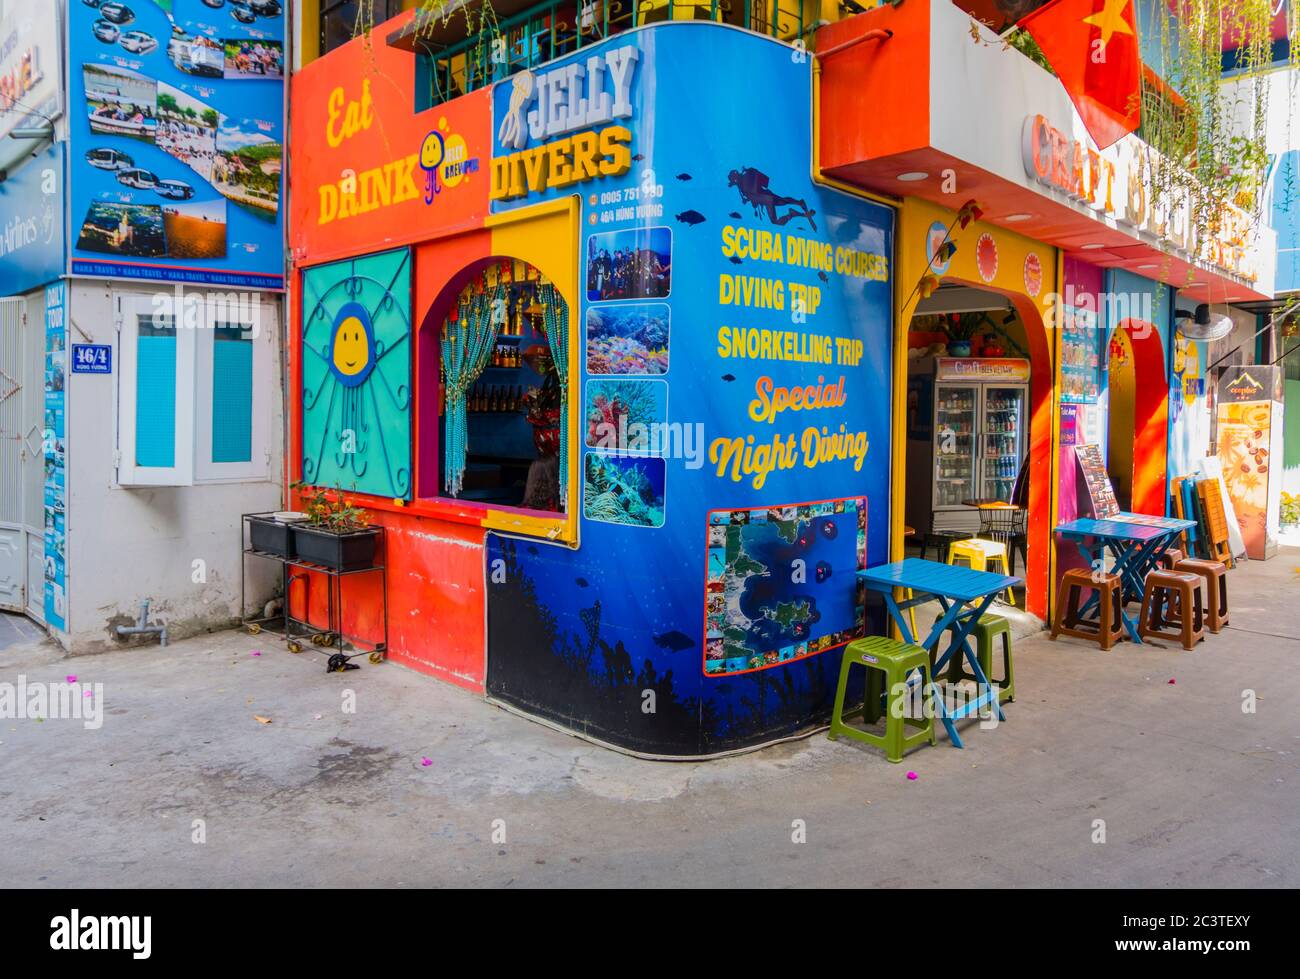 Jelly Divers, travel agency and bar, central Nha Trang, Vietnam, Asia Stock Photo